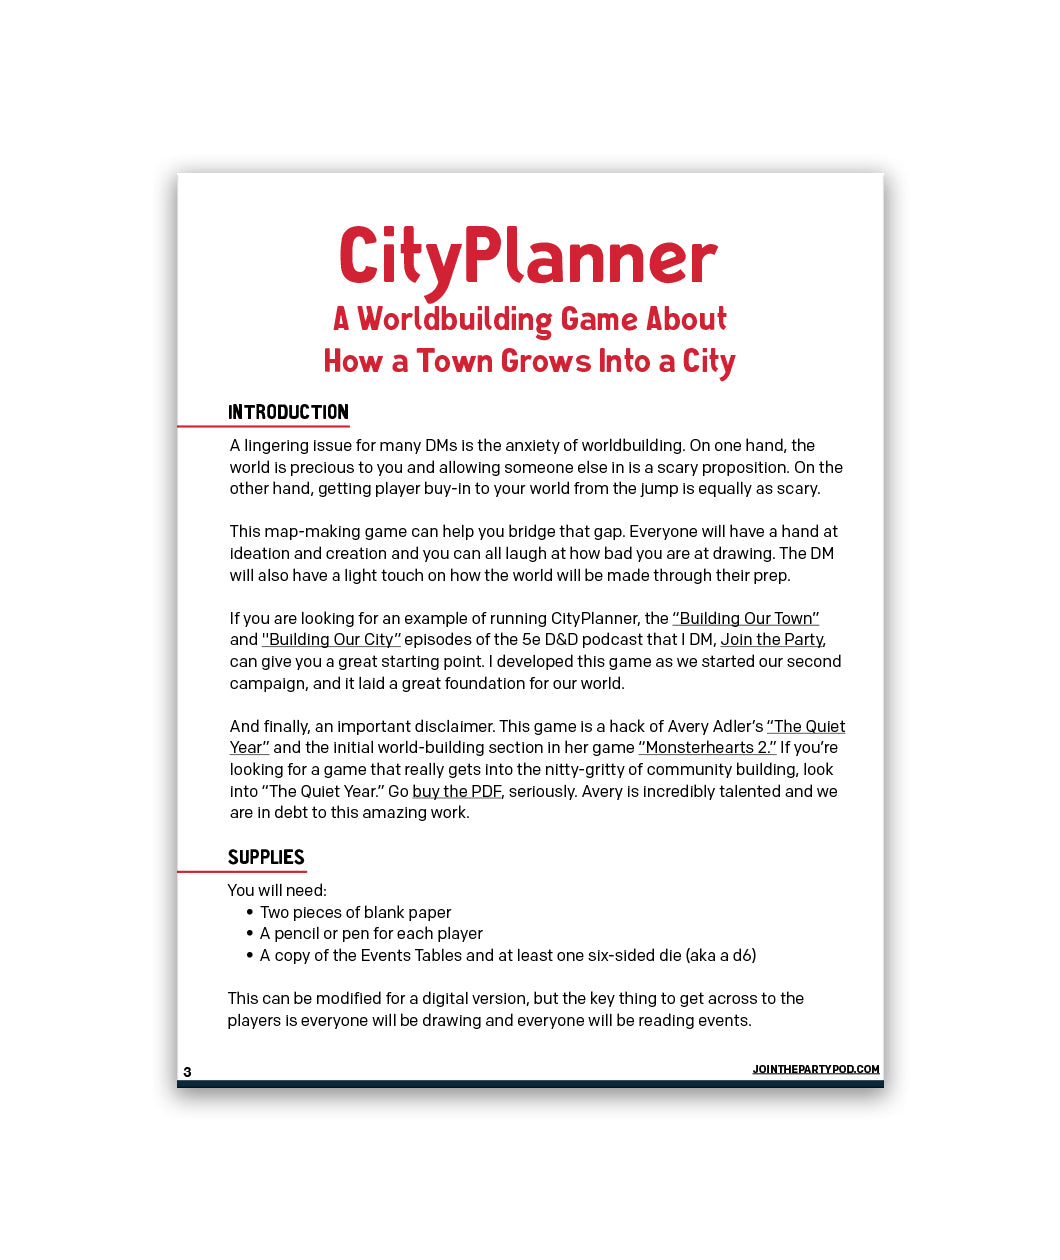 The first page of the Three Short Games to Build Stories from Join the Party titled "CityPlanner". Shows an introduction section and supplies section. 